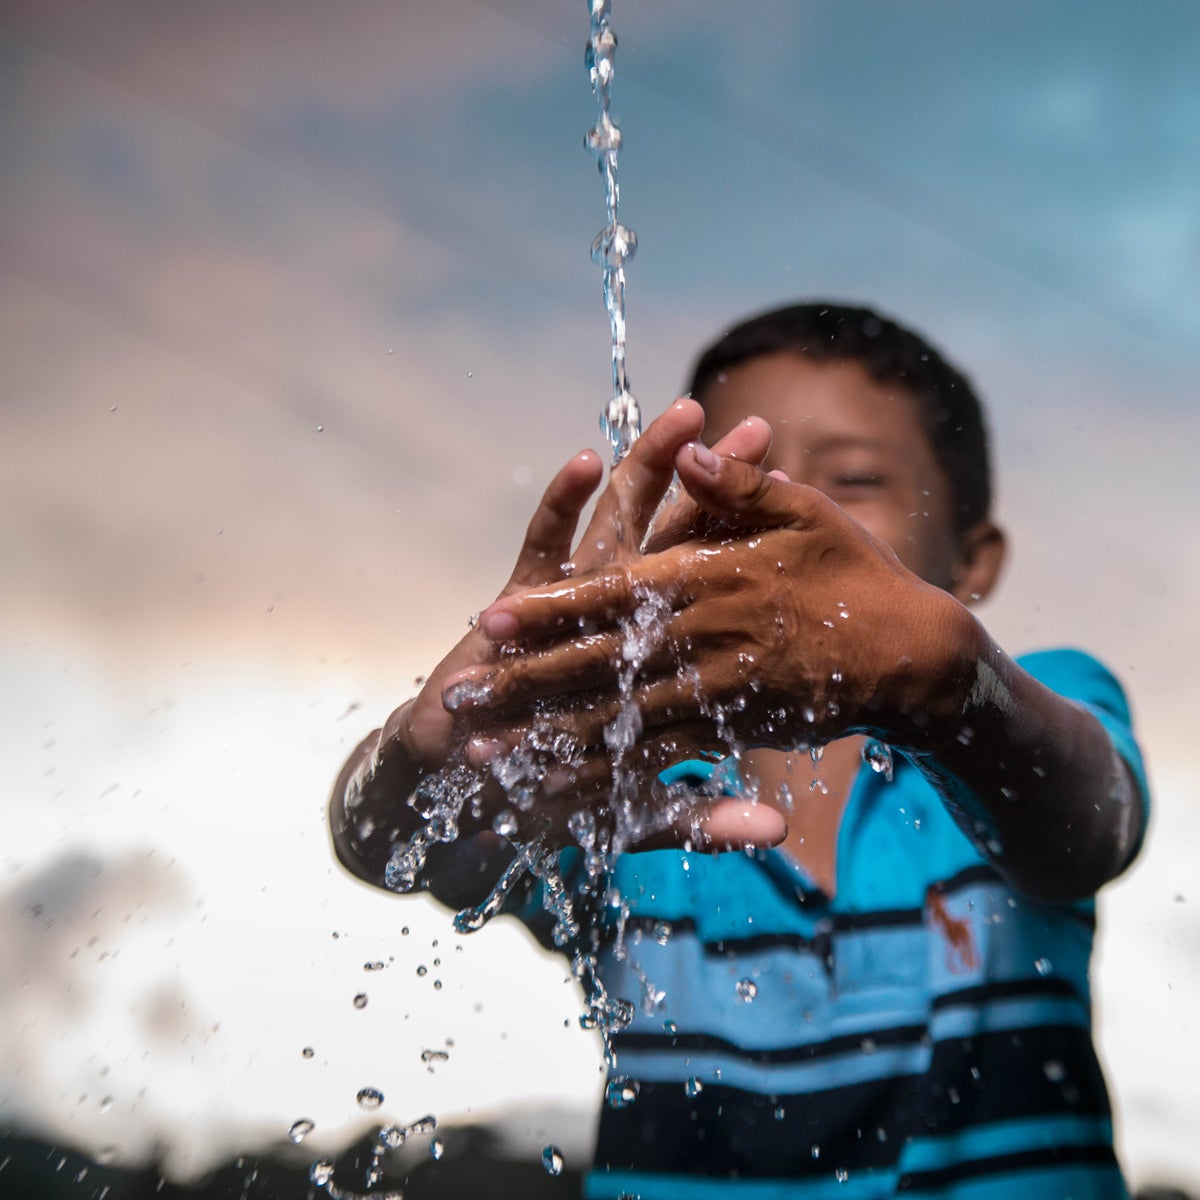 Water means life for families in Honduras.